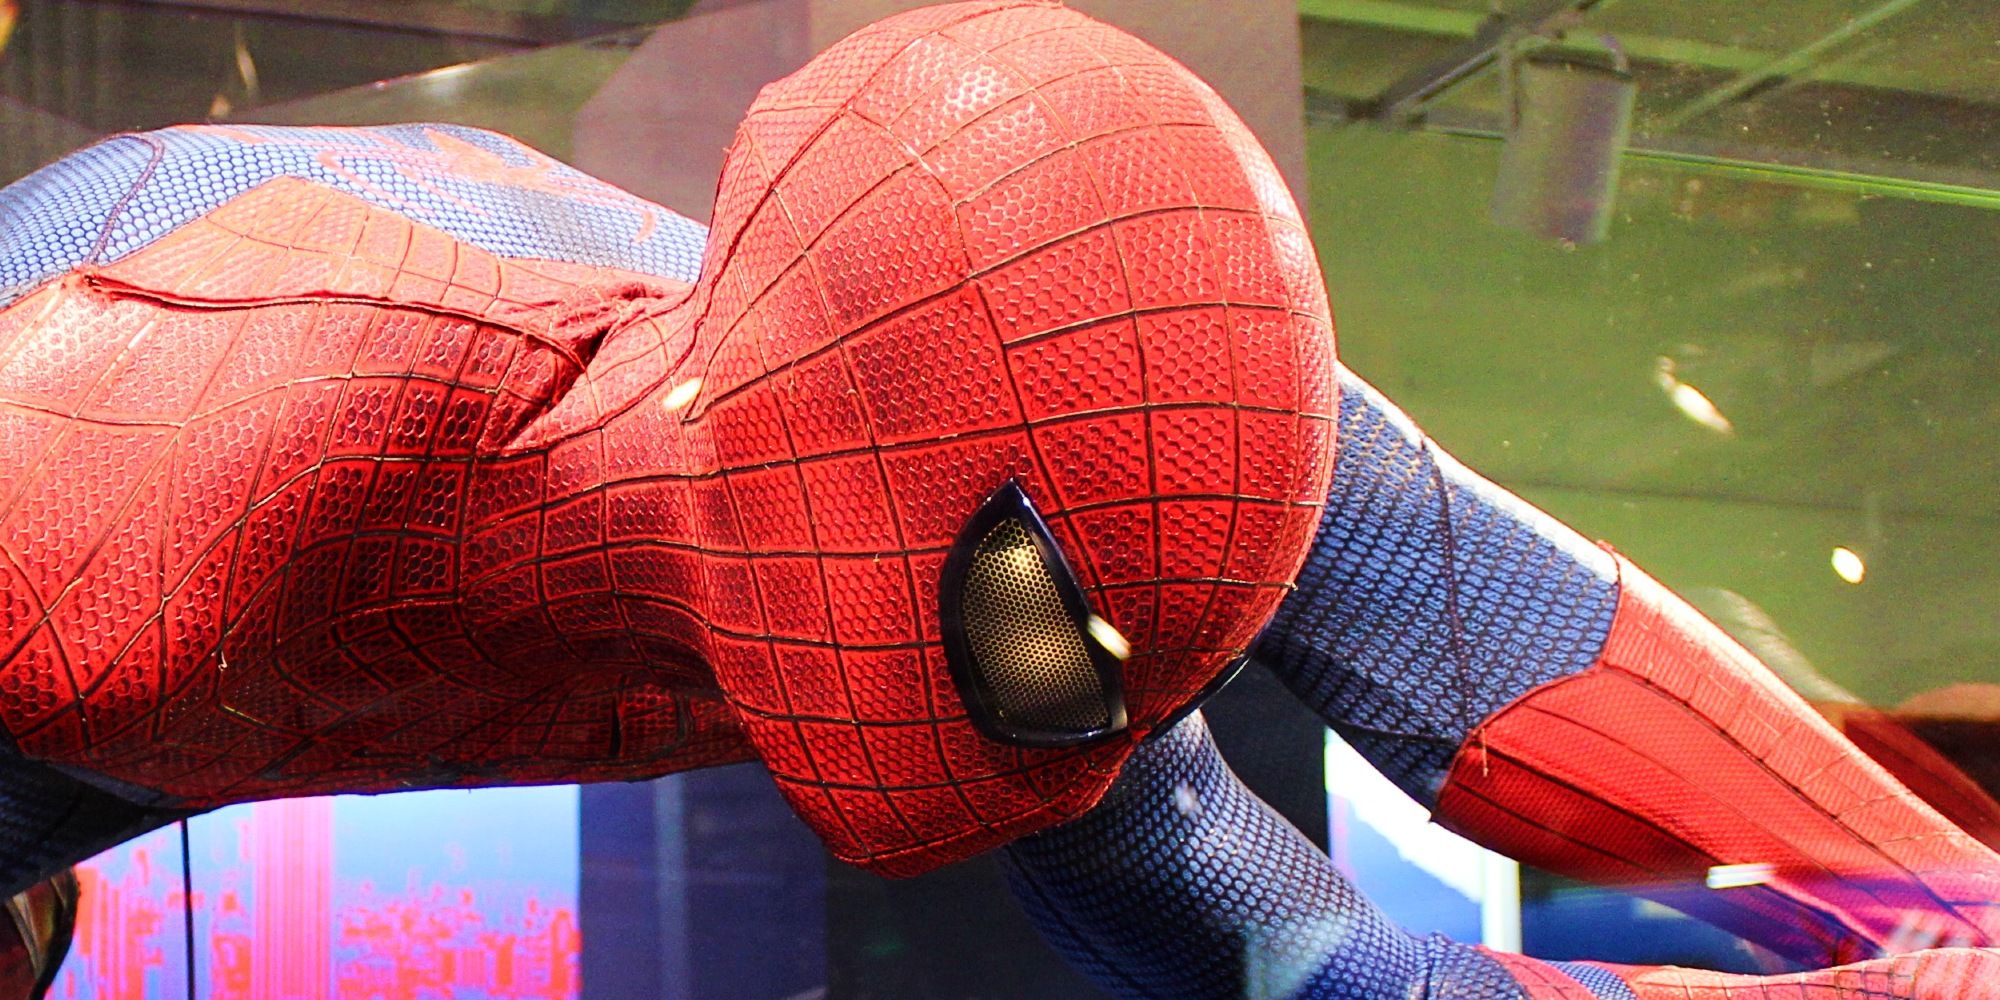 The Amazing Spiderman Suit Amazing Spiderman 1 Cosplay Suit With